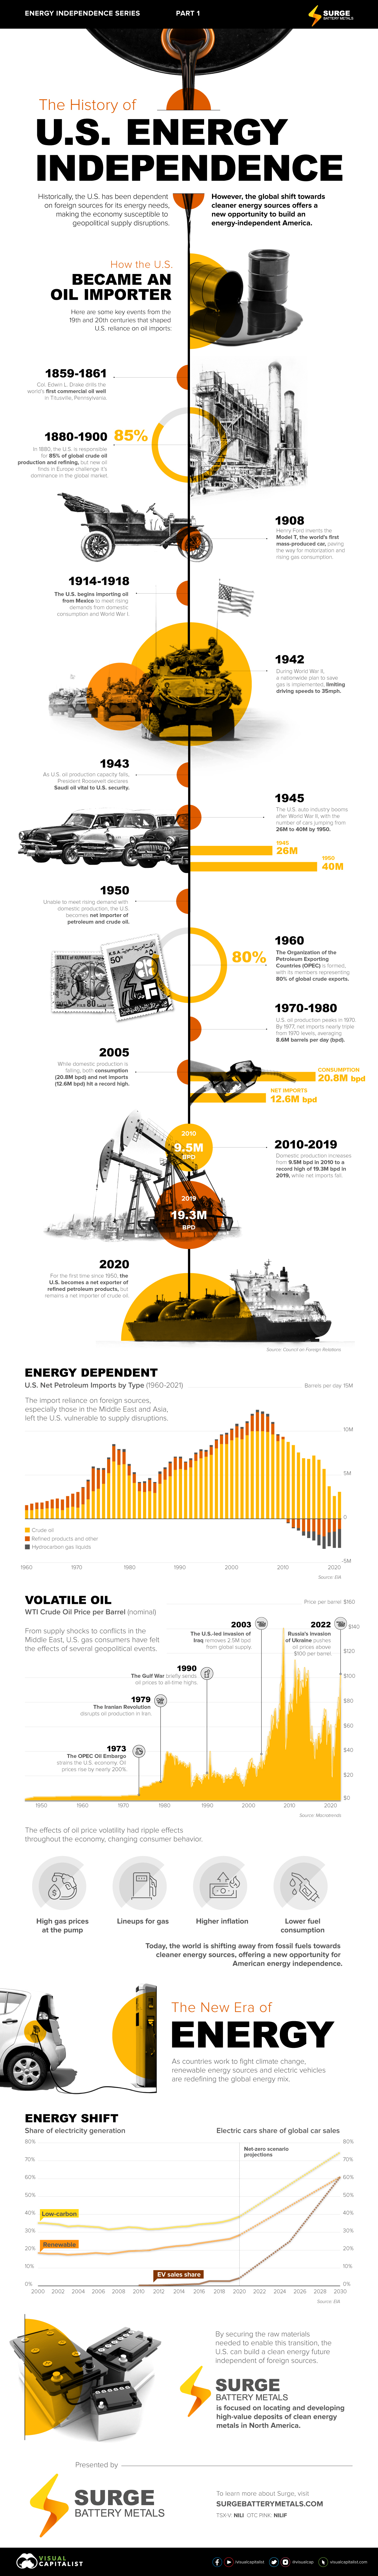 history of U.S. energy independence infographic